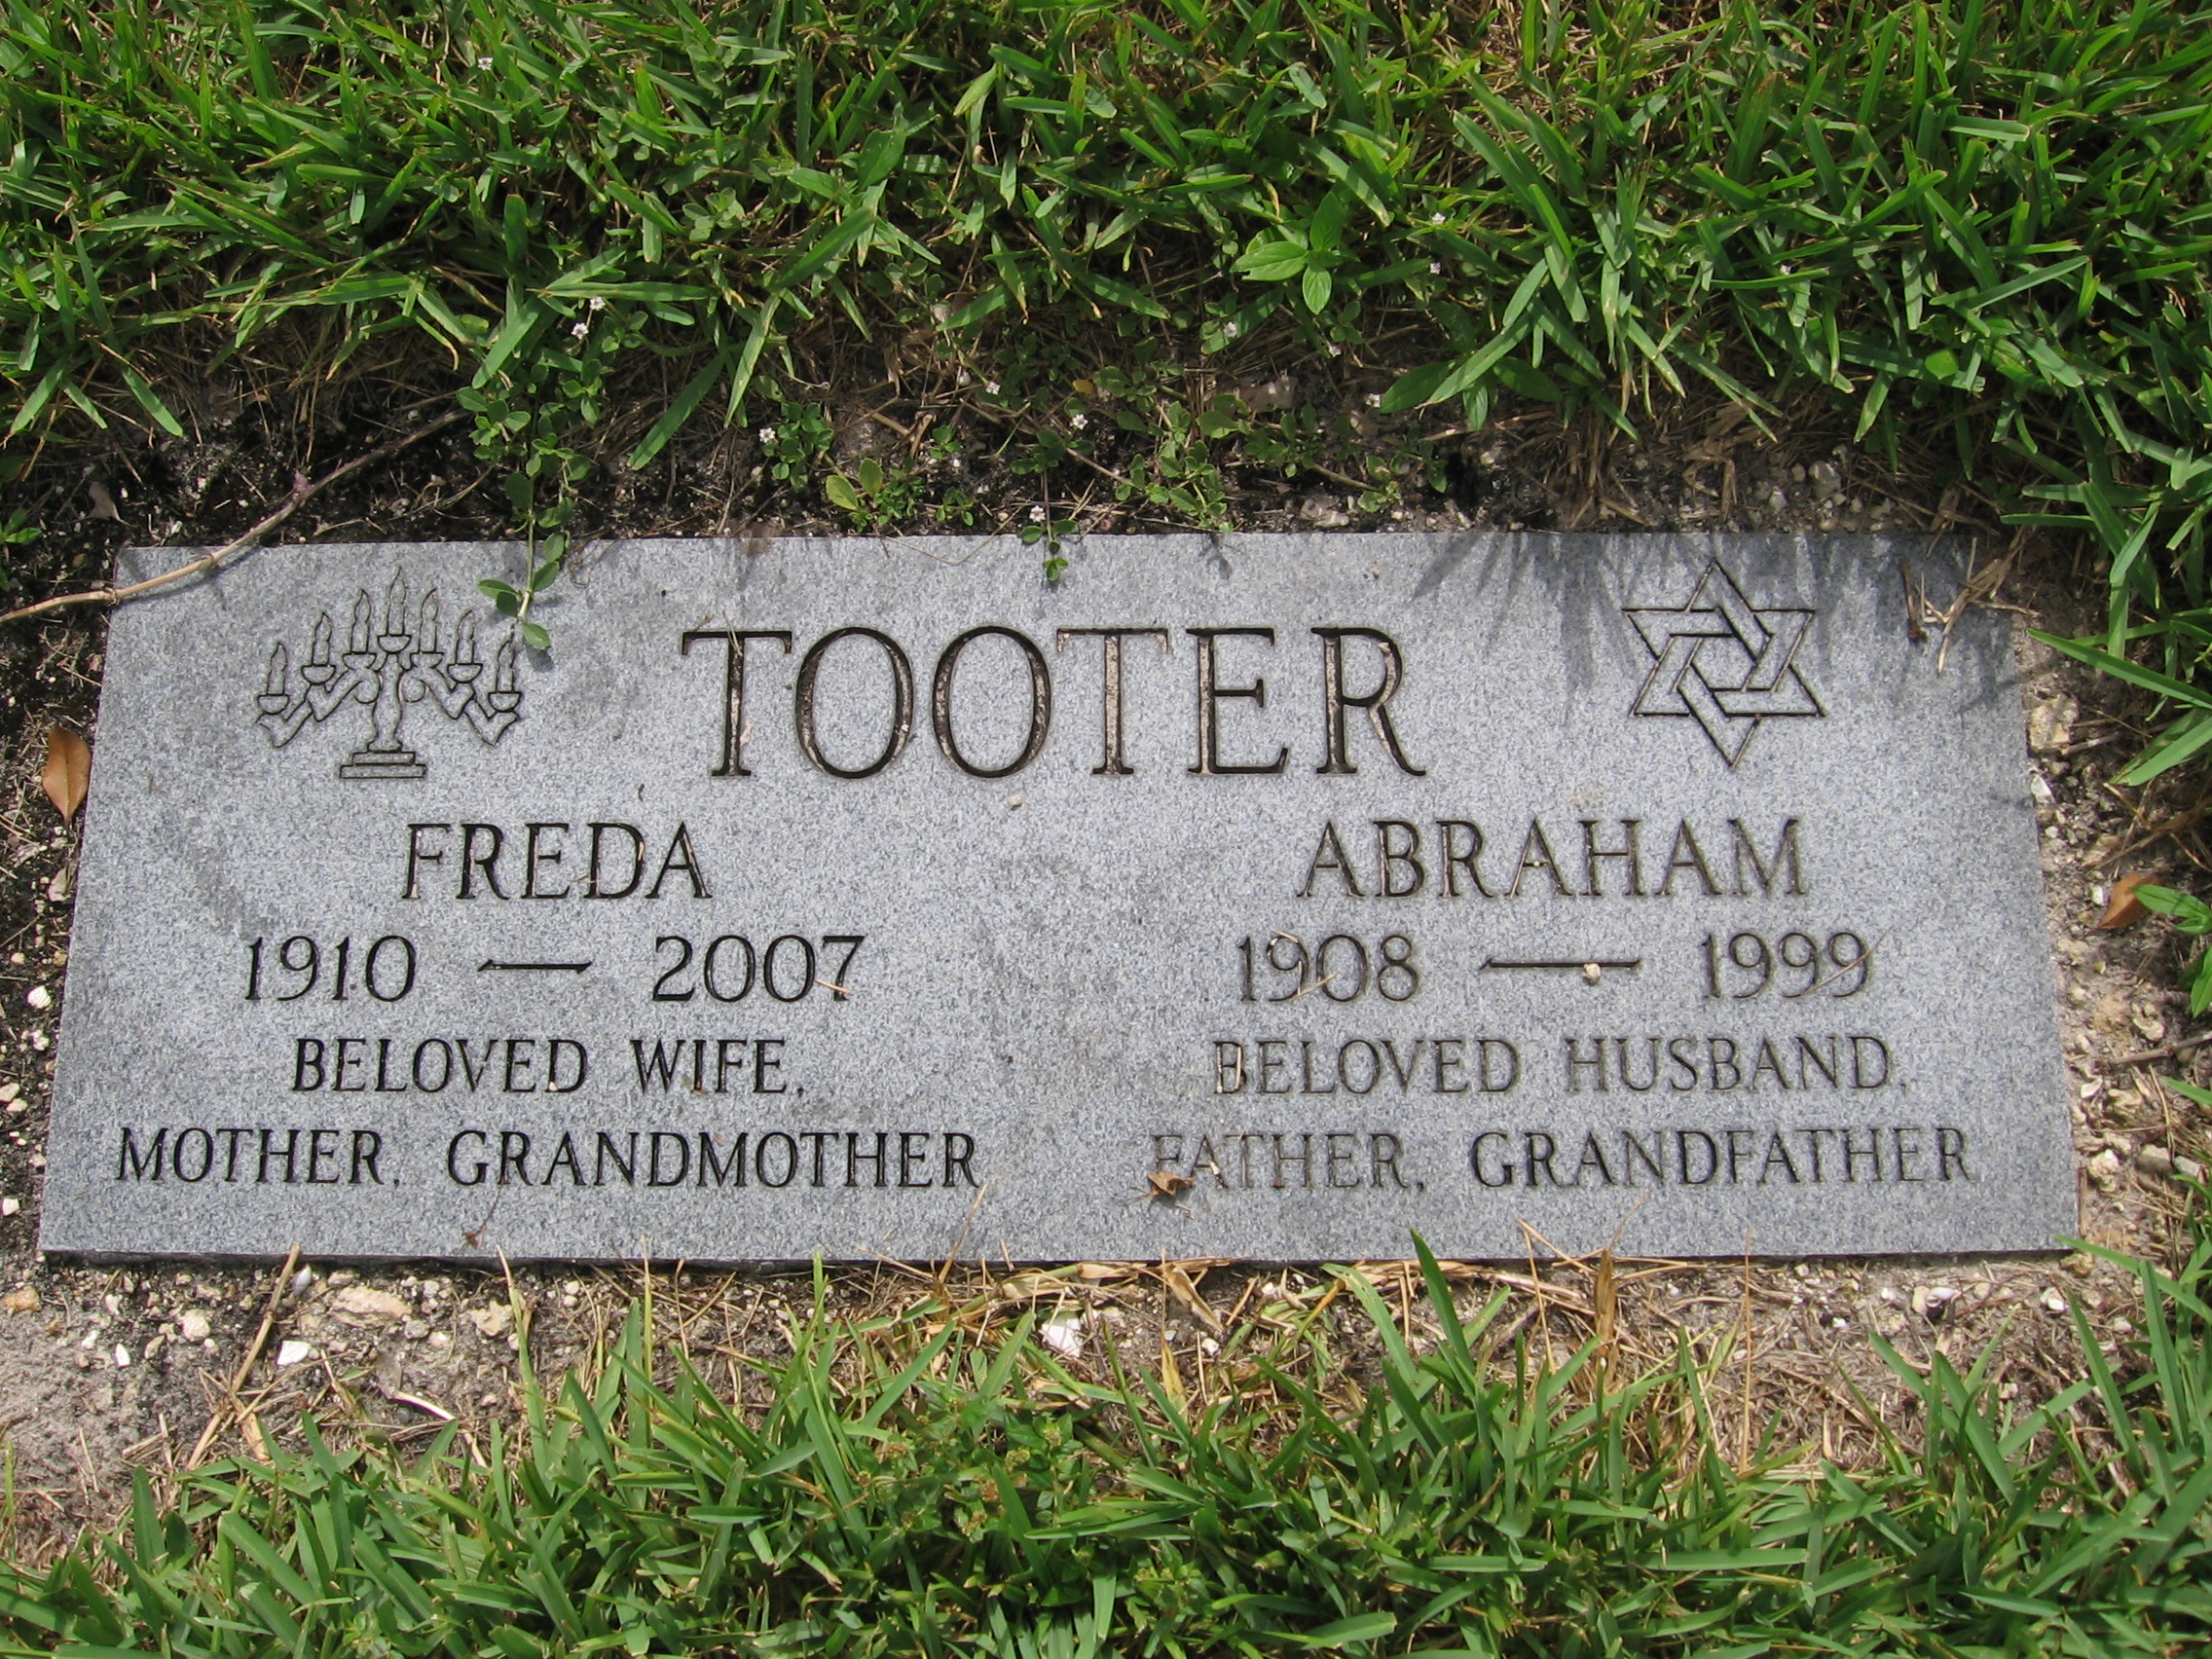 Abraham Tooter